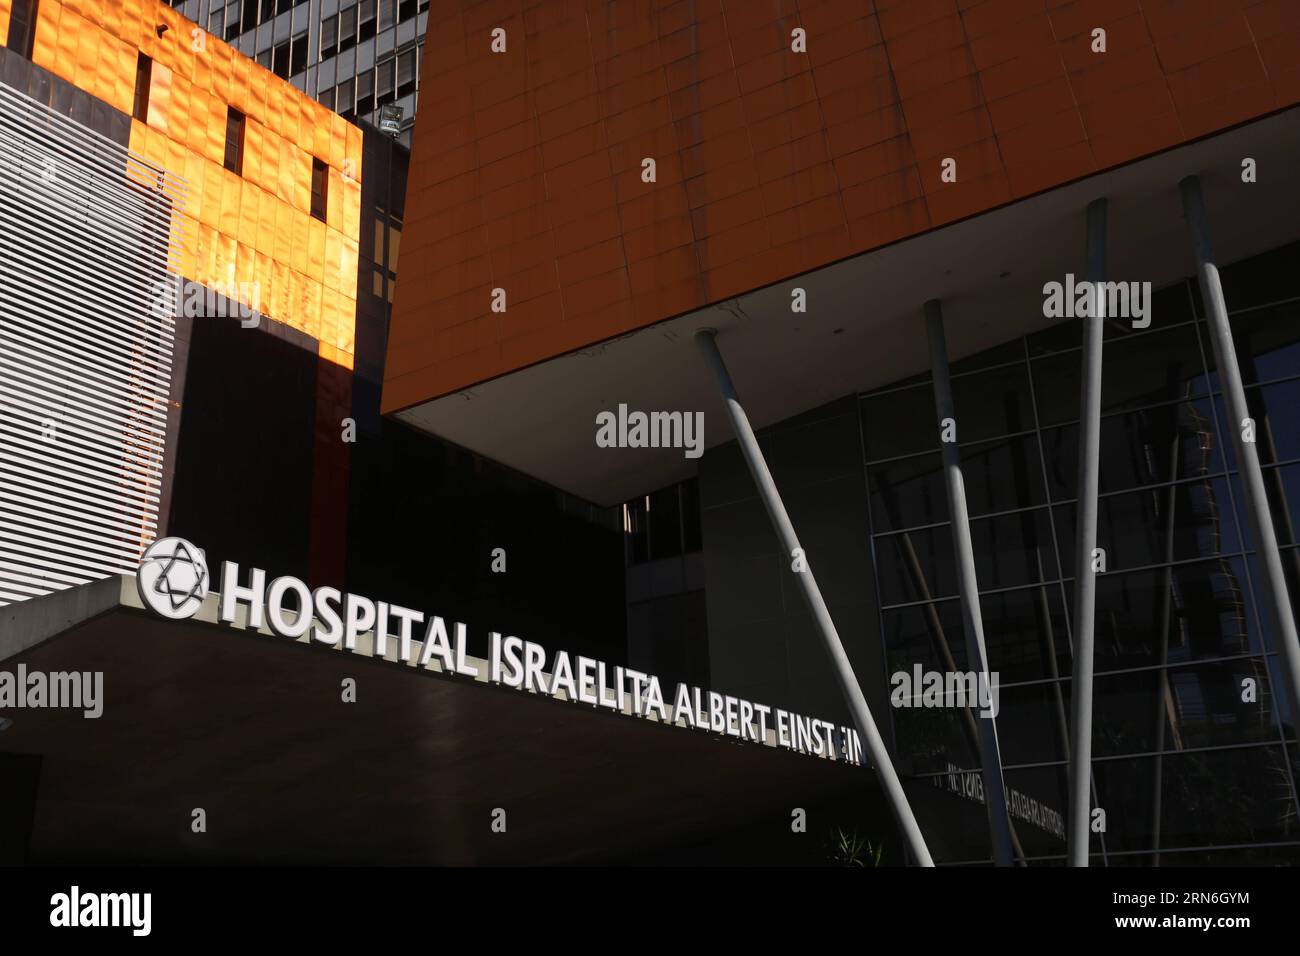 Exterior view of the Albert Einstein Hospital, where Joe Jackson, father of the late Michael Jackson is hospitalized in the intensive care unit, in Sao Paulo, Brazil, on July 27, 2015. Acording to the local press, Jackson was admitted in the Hospital on Sunday after a stroke. Rahel Patrasso) (rtg) BRAZIL-SAO PAULO-ENTERTAINMENT-JOE JACKSON e RahelxPatrasso PUBLICATIONxNOTxINxCHN   Exterior View of The Albert Einstein Hospital Where Joe Jackson Father of The Late Michael Jackson IS hospitalized in The Intense Care Unit in Sao Paulo Brazil ON July 27 2015 acording to The Local Press Jackson what Stock Photo